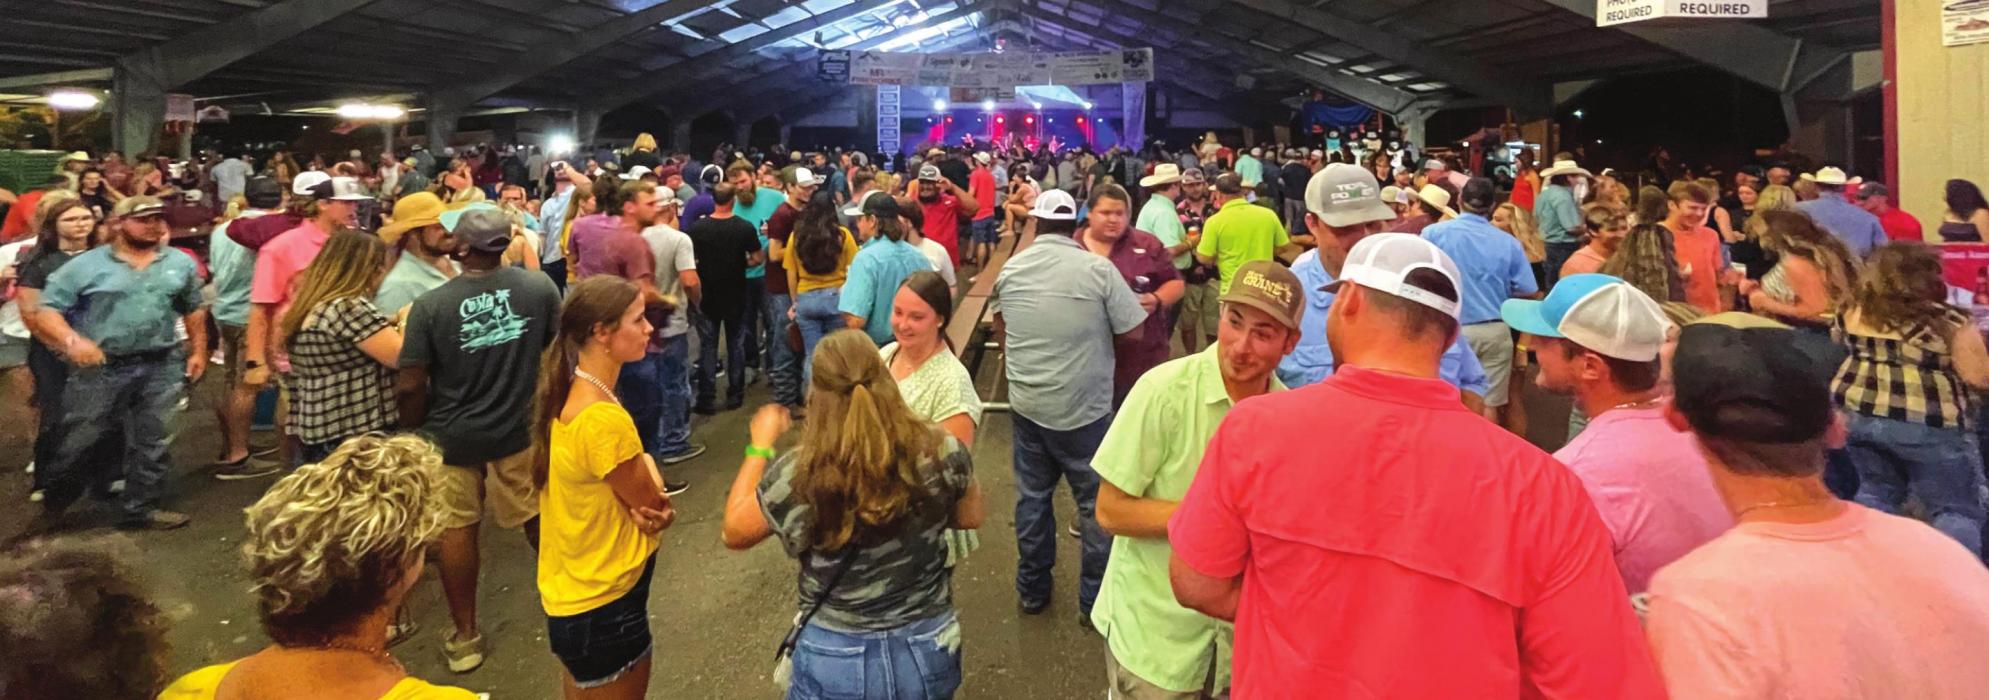 The band “Little Texas” and country music up-and-comer Kolby Cooper performed Friday night before a well-attended crowd at the Schulenburg Festival. Photos by Andy Behlen